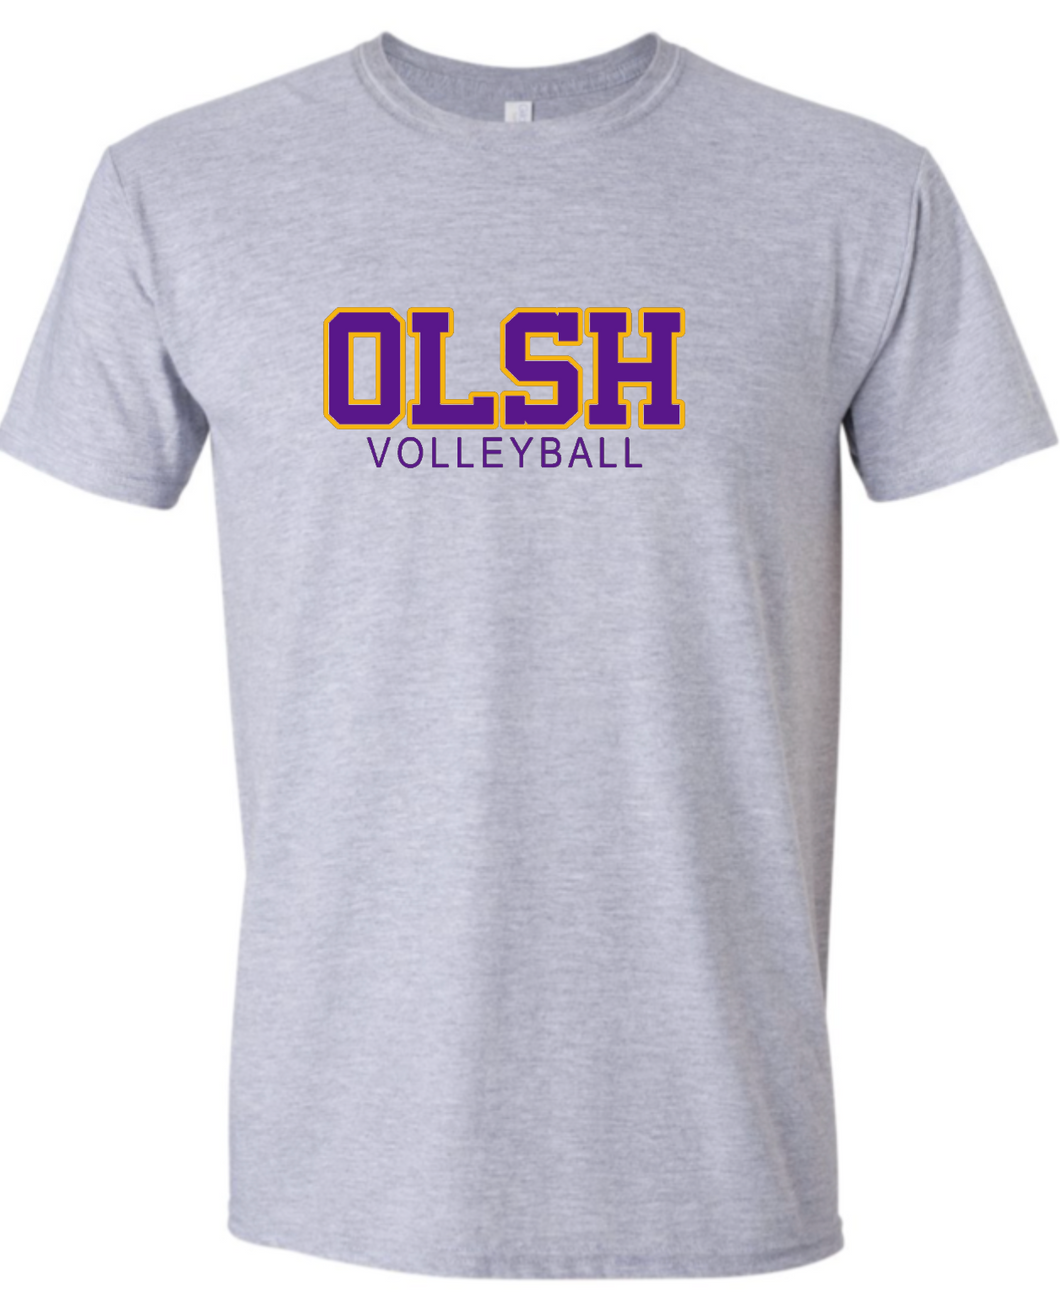 OLSH VOLLEYBALL YOUTH & ADULT SOFTSTYLE COTTON JERSEY SHORT SLEEVE T-SHIRT  - SPORT GREY